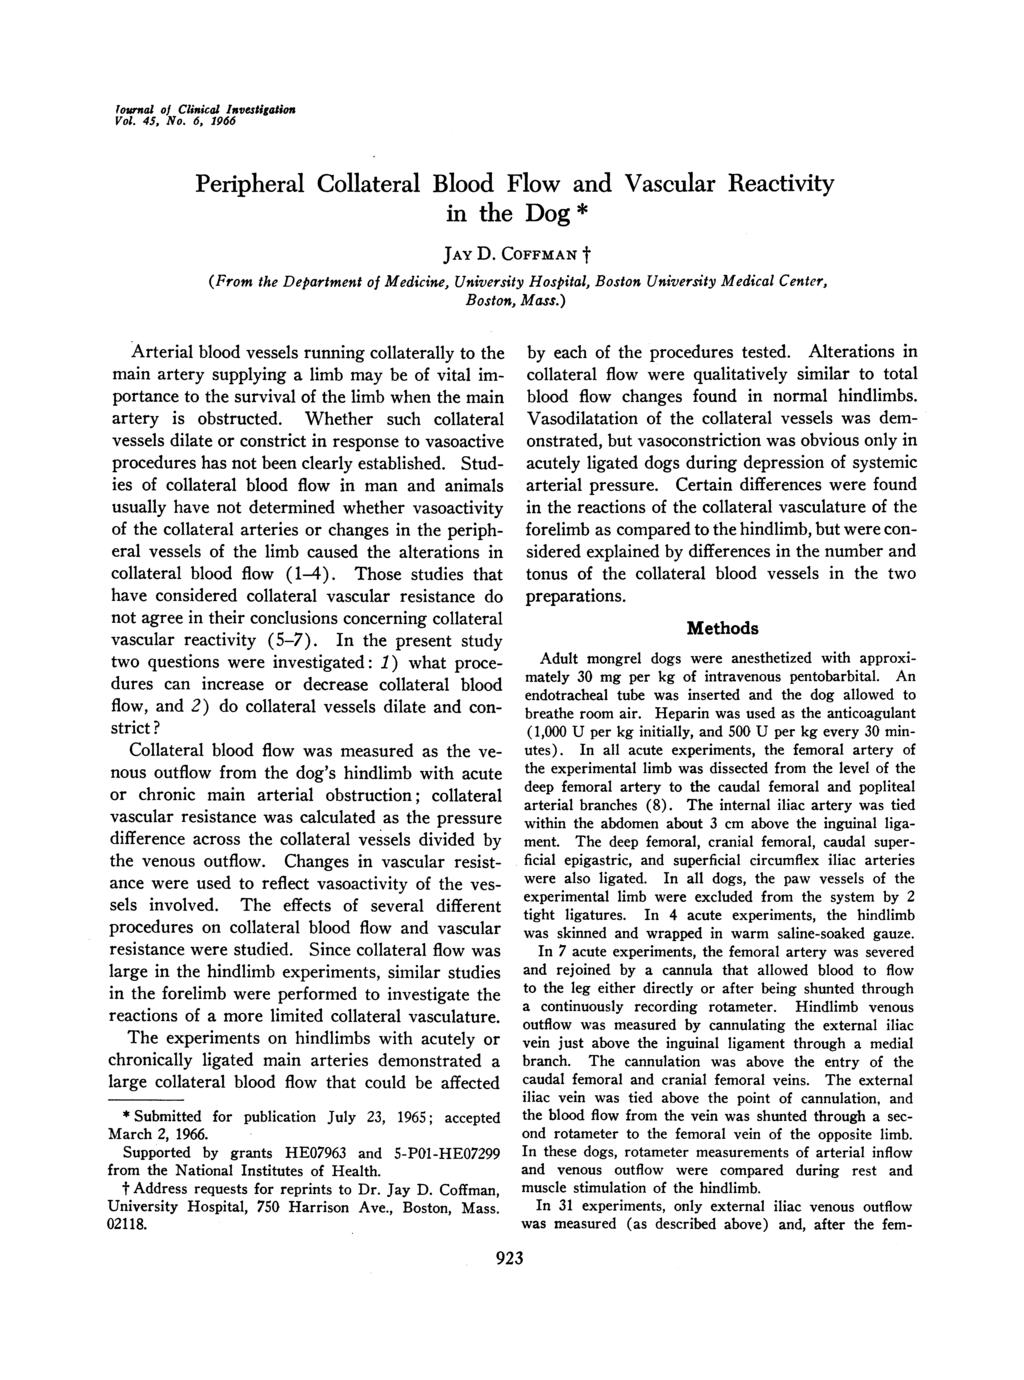 tournal of Clinical Investigation Vol. 45, No. 6, 1966 Peripheral Collateral Blood Flow and Vascular Reactivity in the Dog * JAY D.